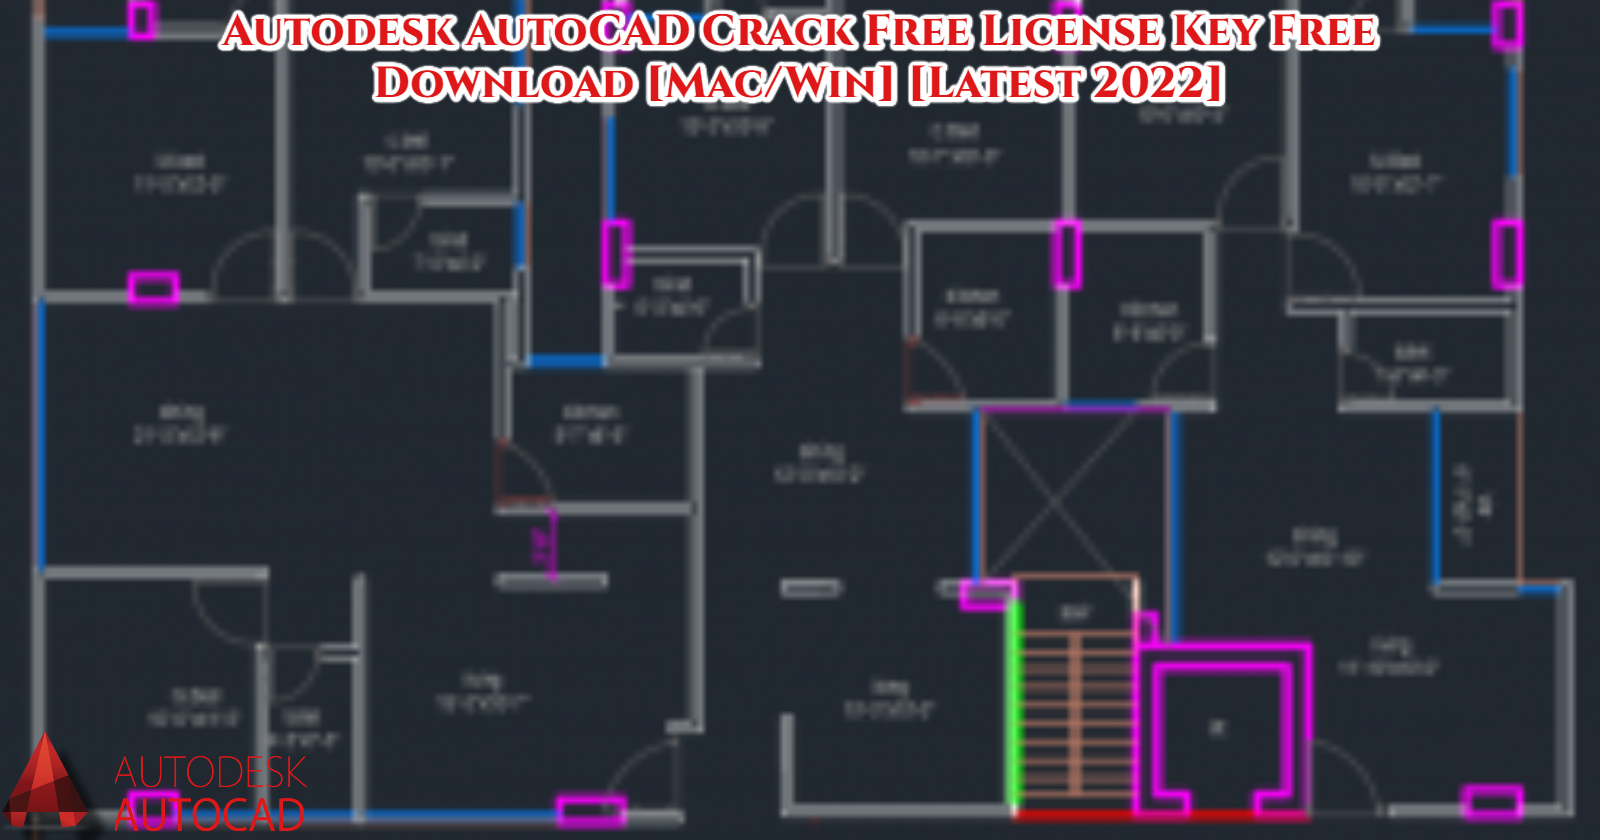 You are currently viewing Autodesk AutoCAD Crack Free License Key Free Download